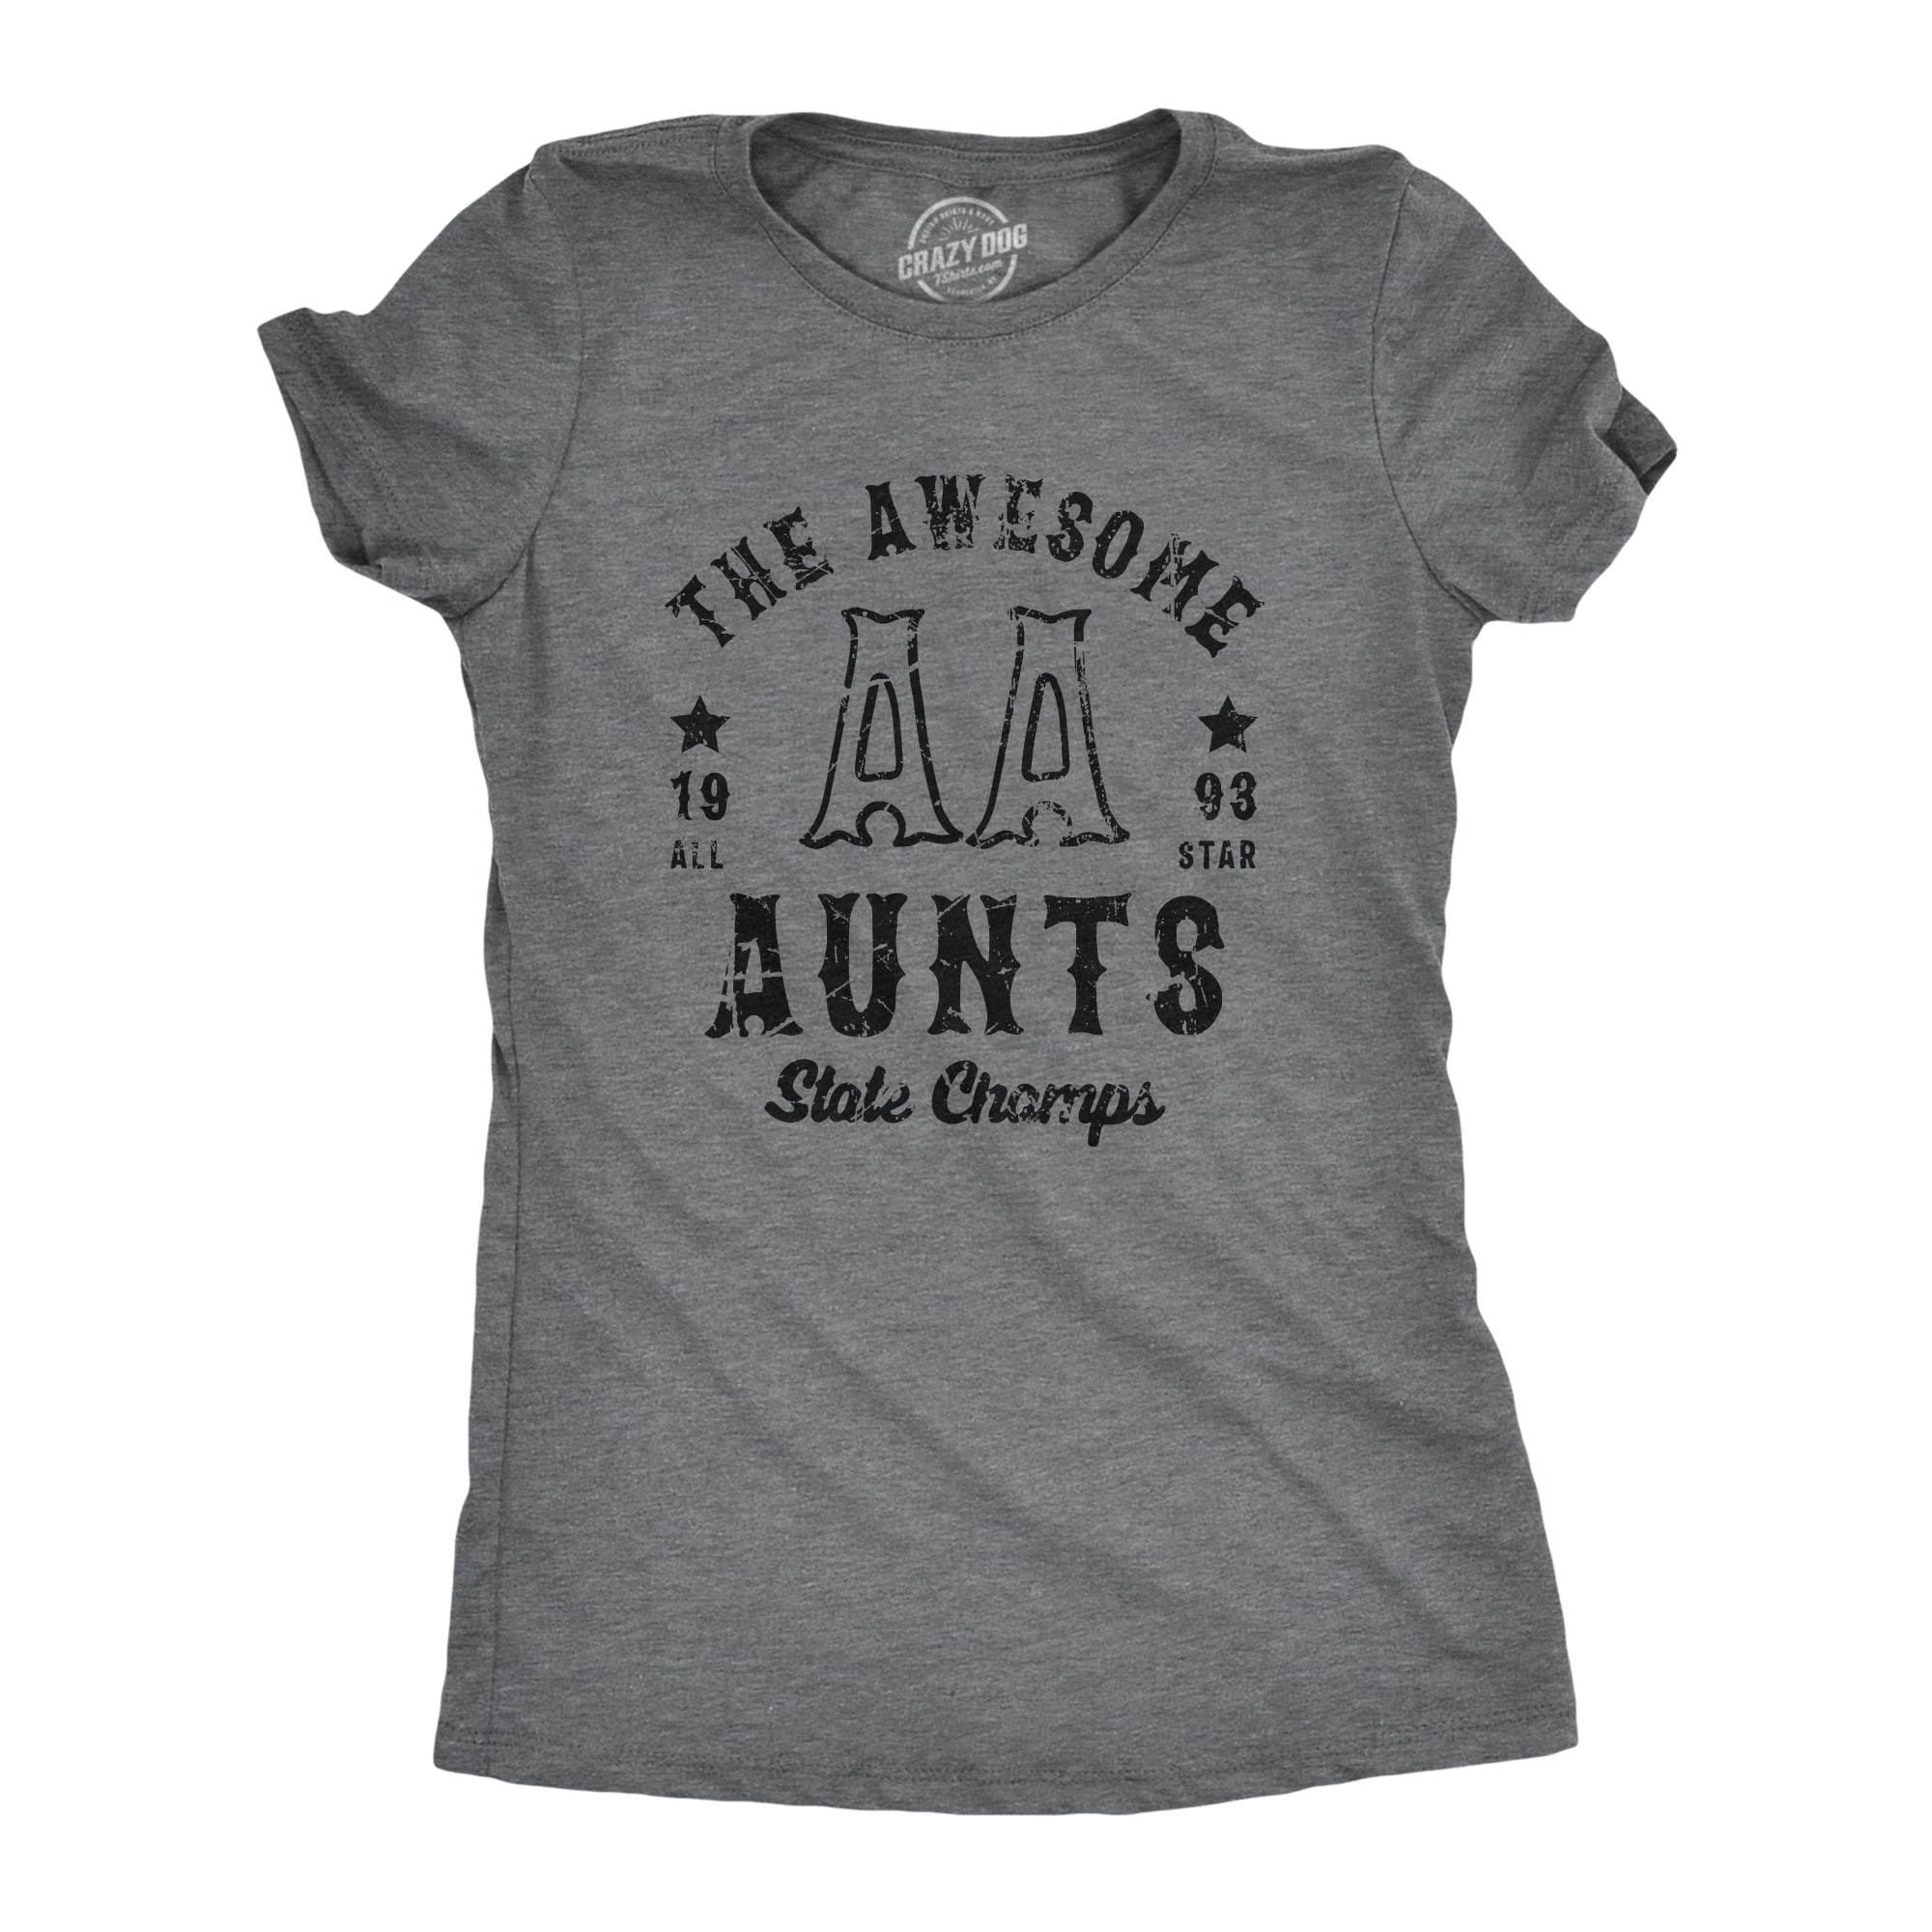 Funny Dark Heather Grey - AUNTS The Awesome Aunts State Champs Womens T Shirt Nerdy Aunt Sarcastic Tee